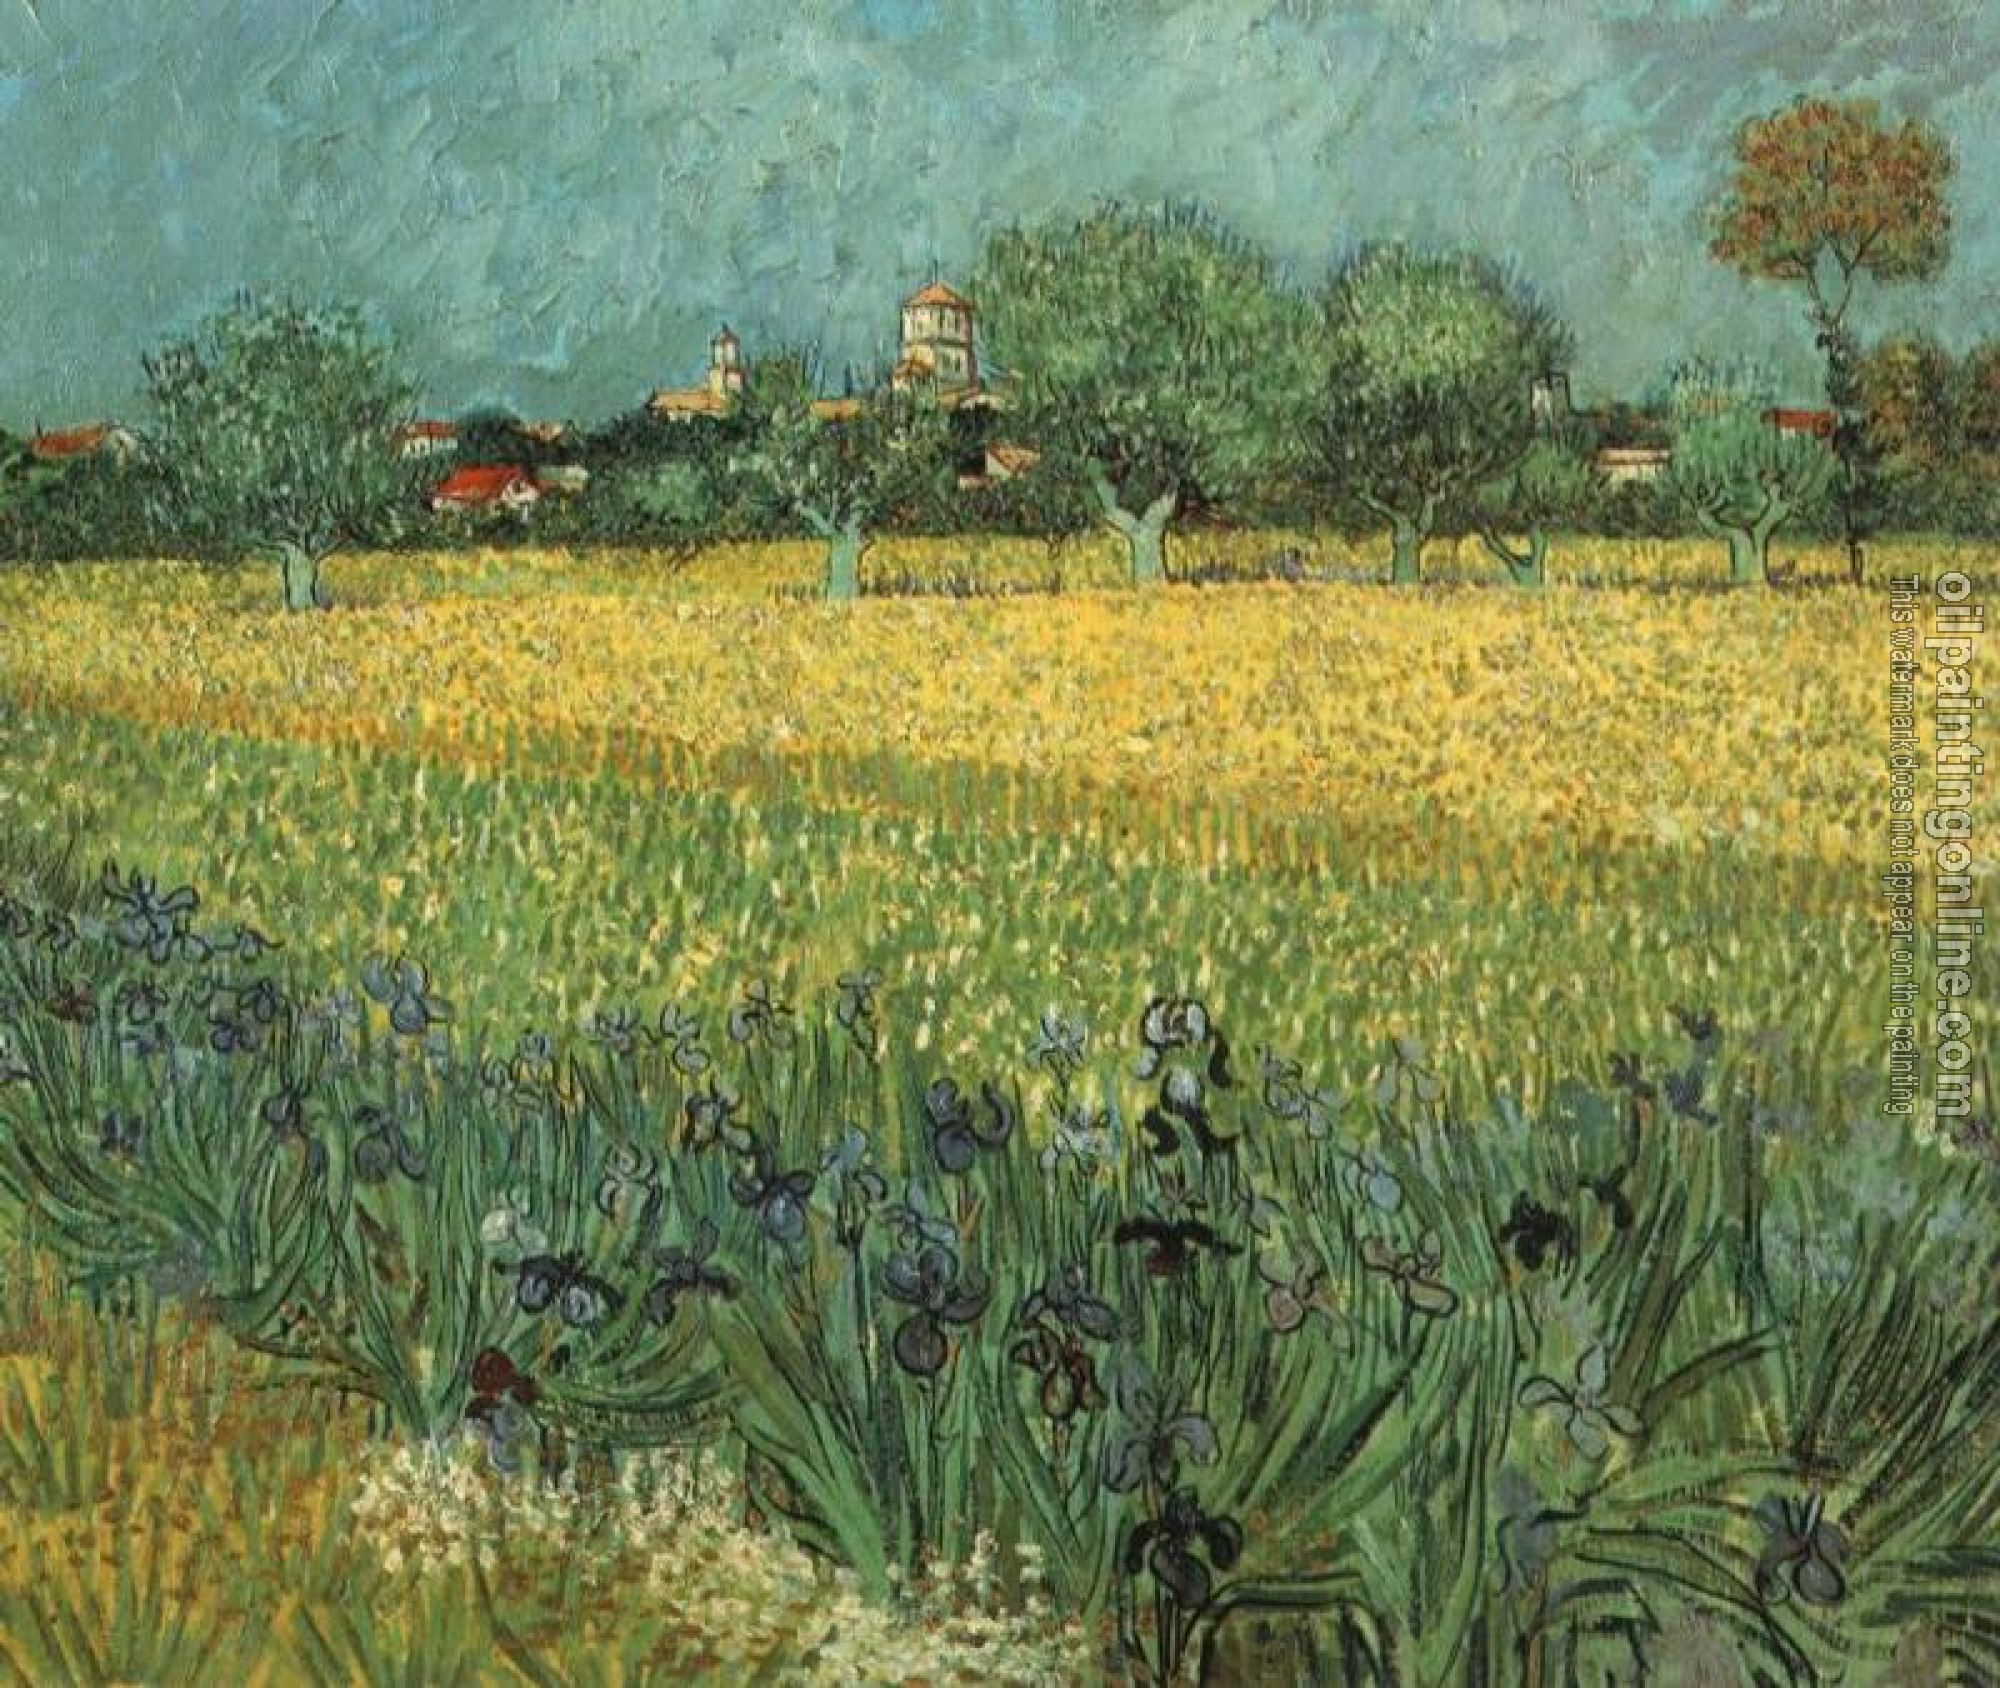 Gogh, Vincent van - View of Arles with Irises in the Foreground